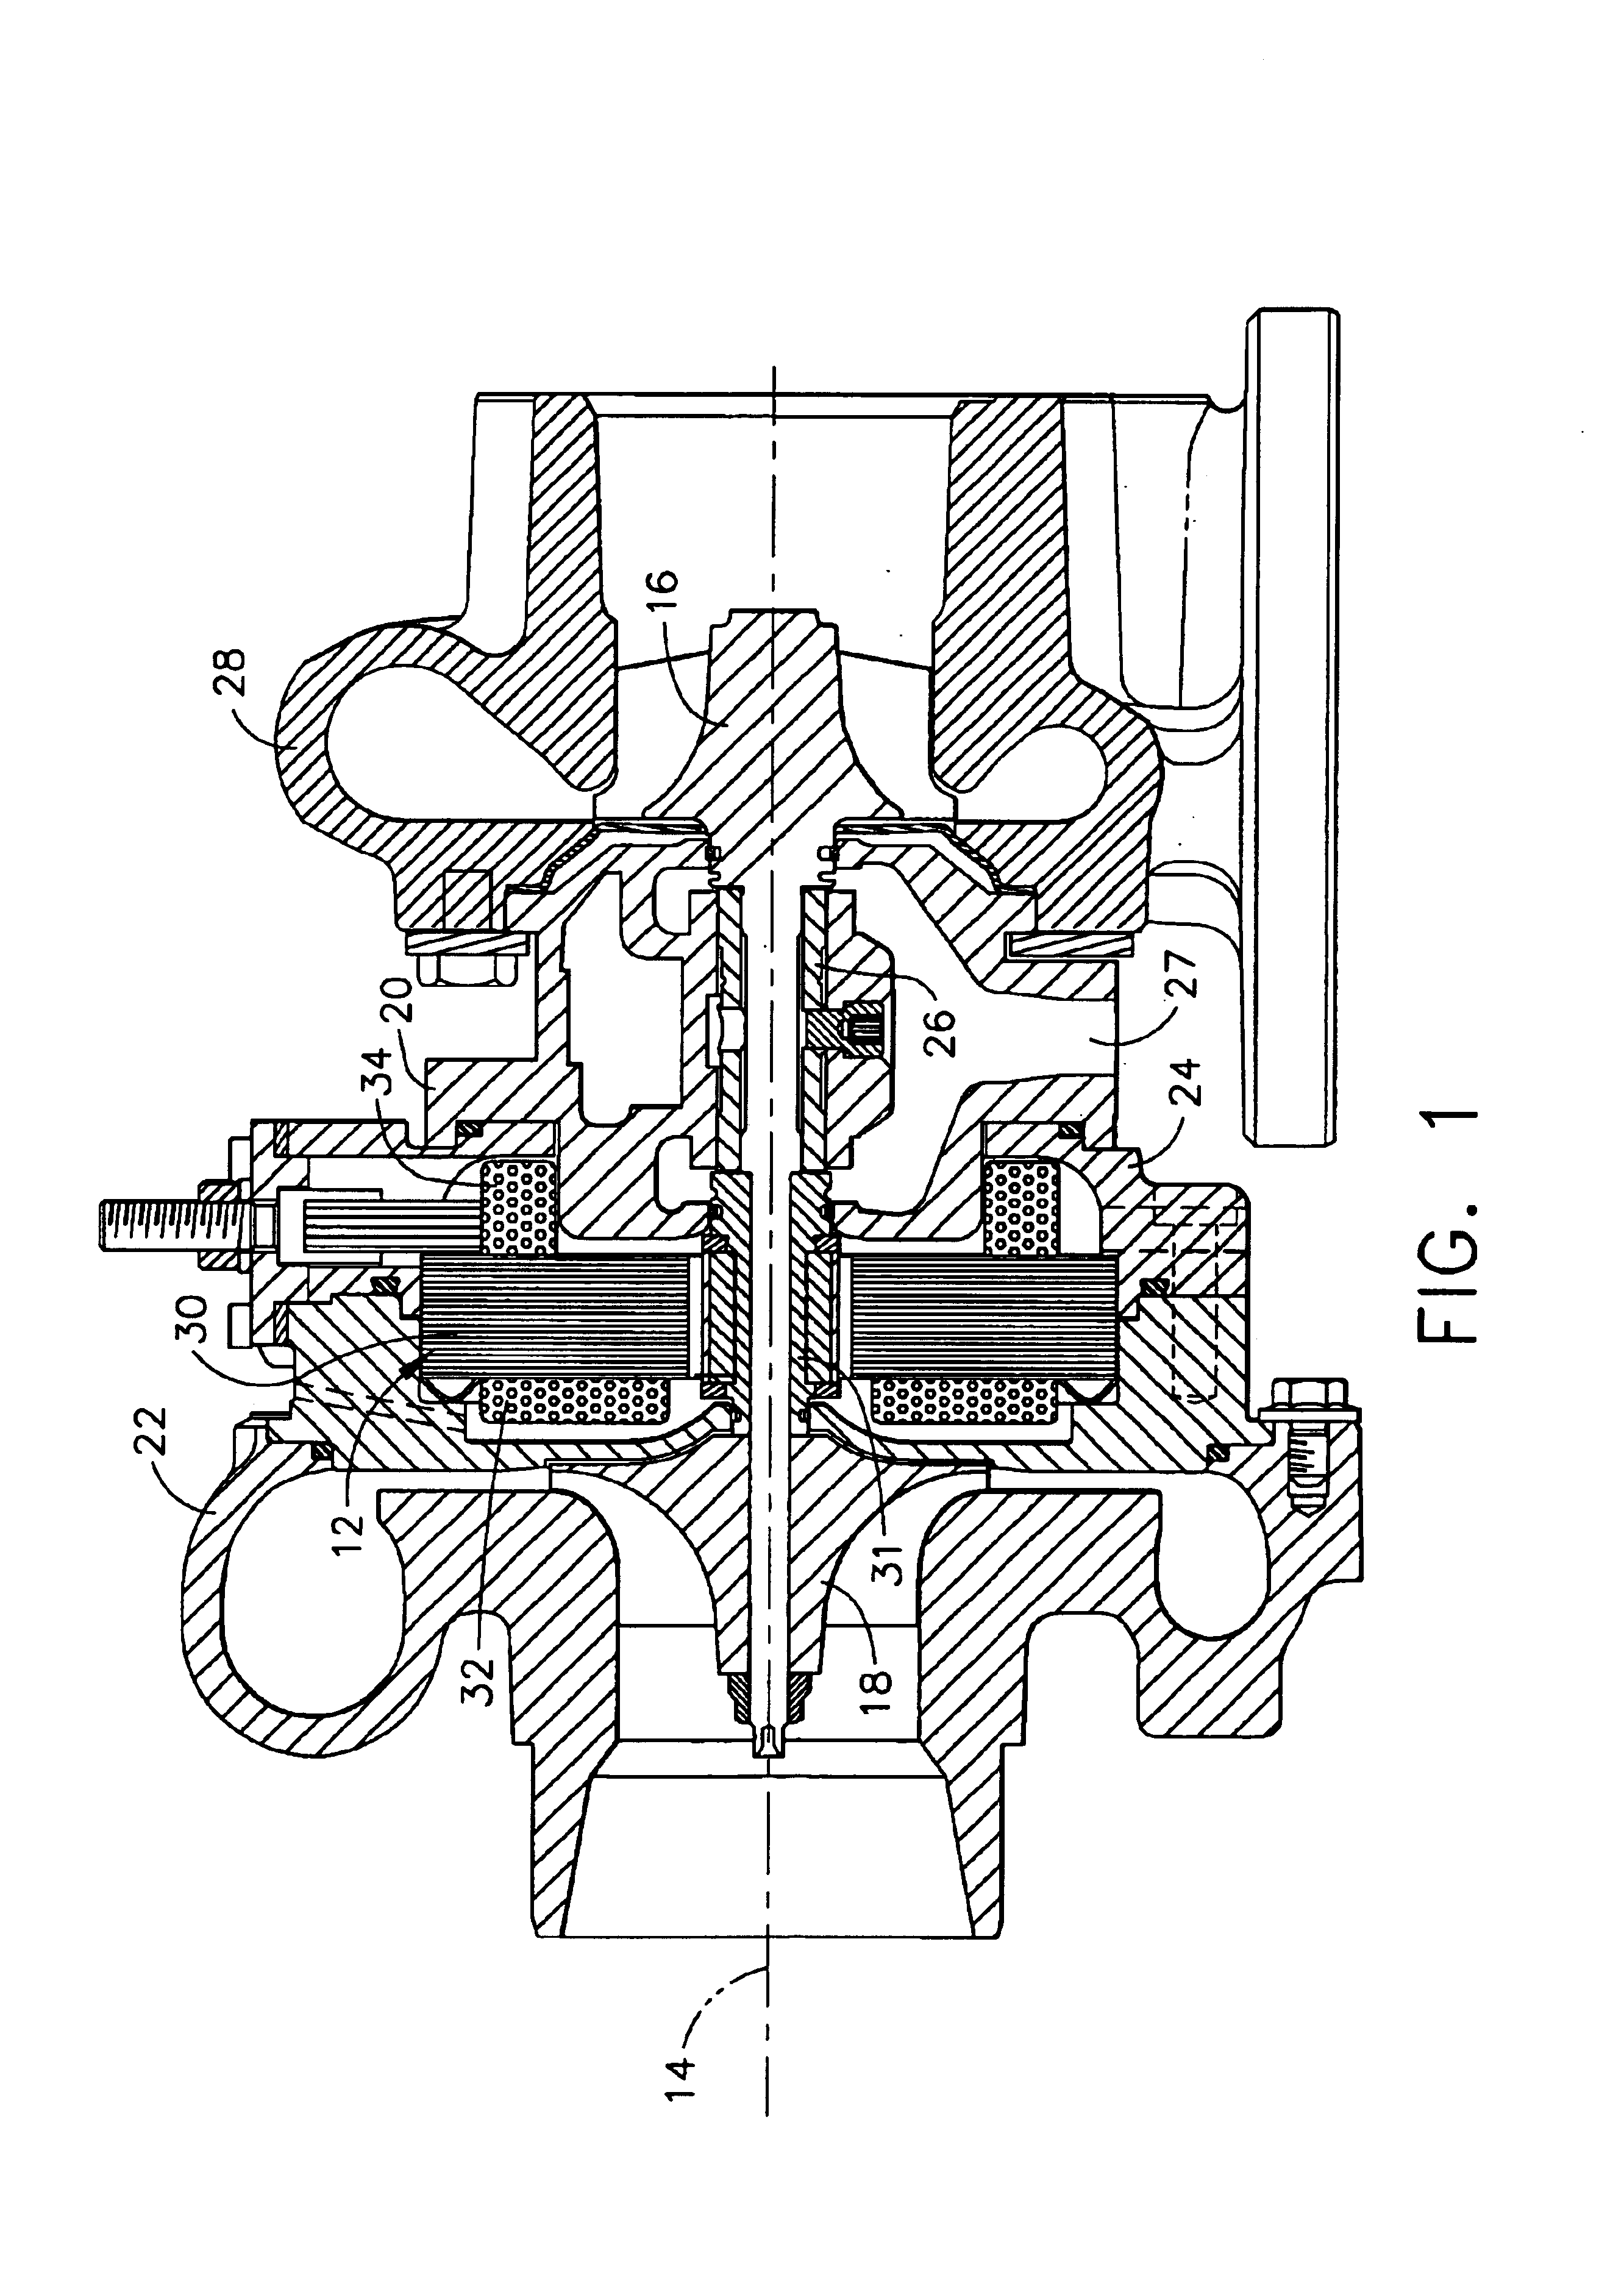 Center housing design for electric assisted turbocharger